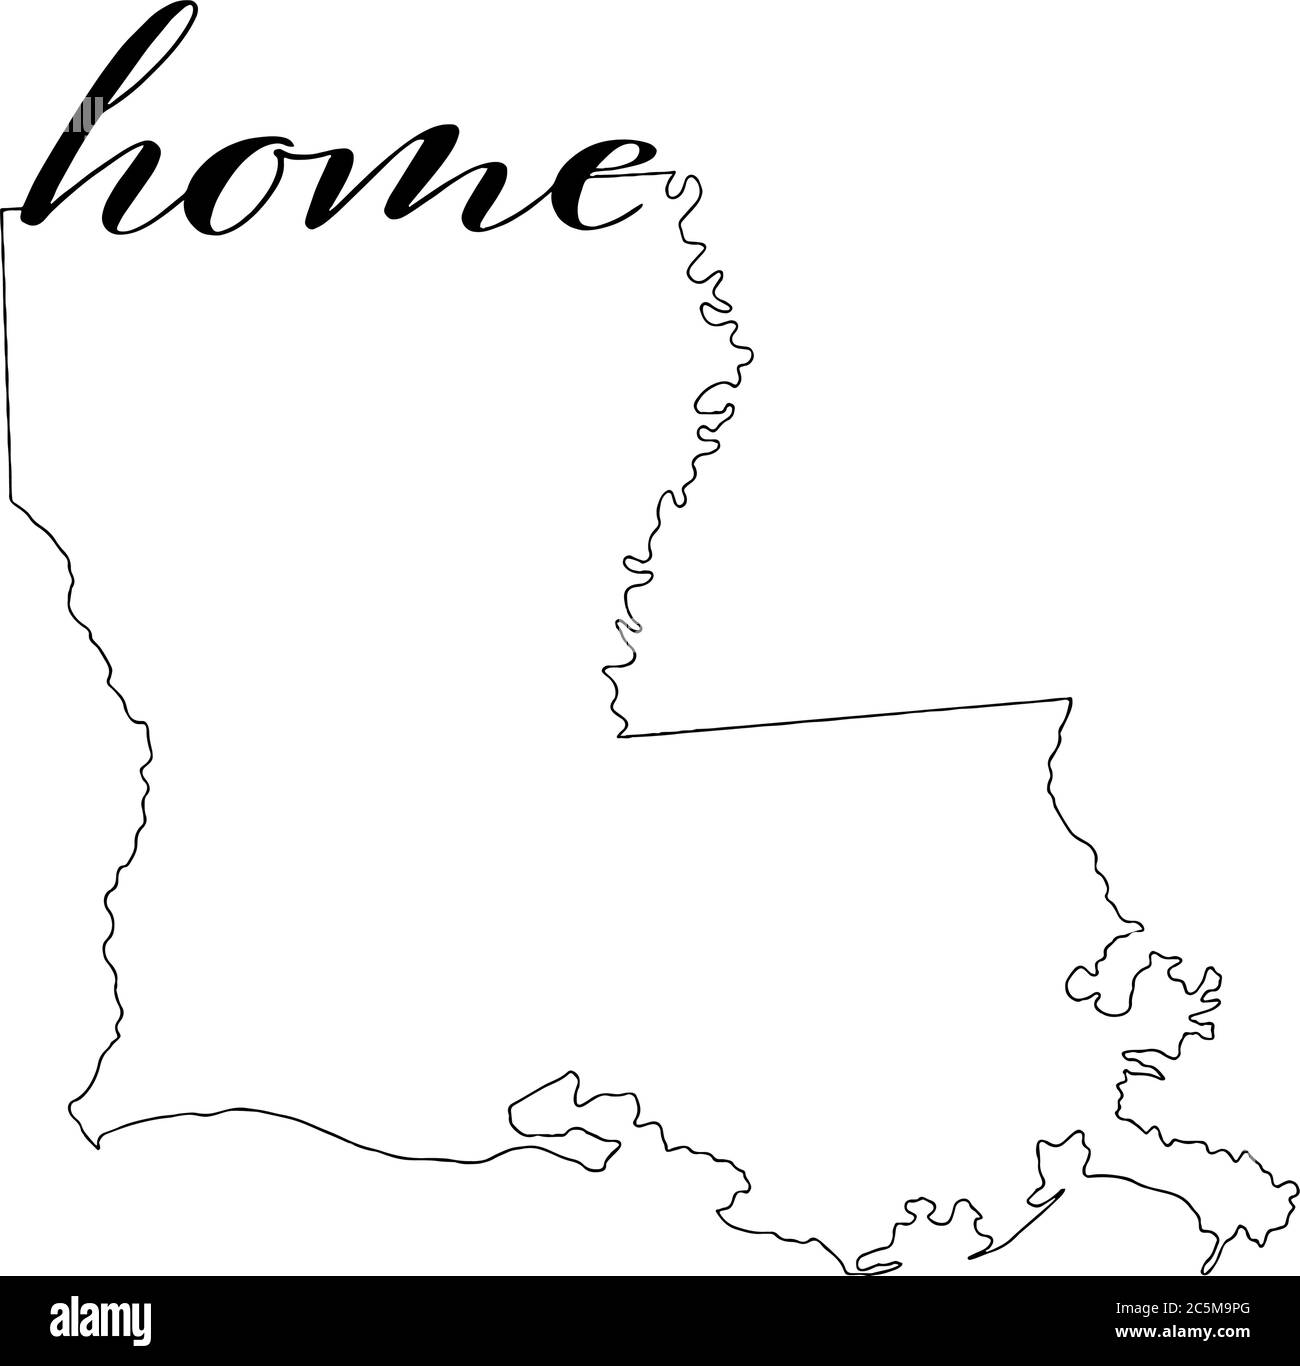 Louisiana state map outline with home written in the outline Stock Vector